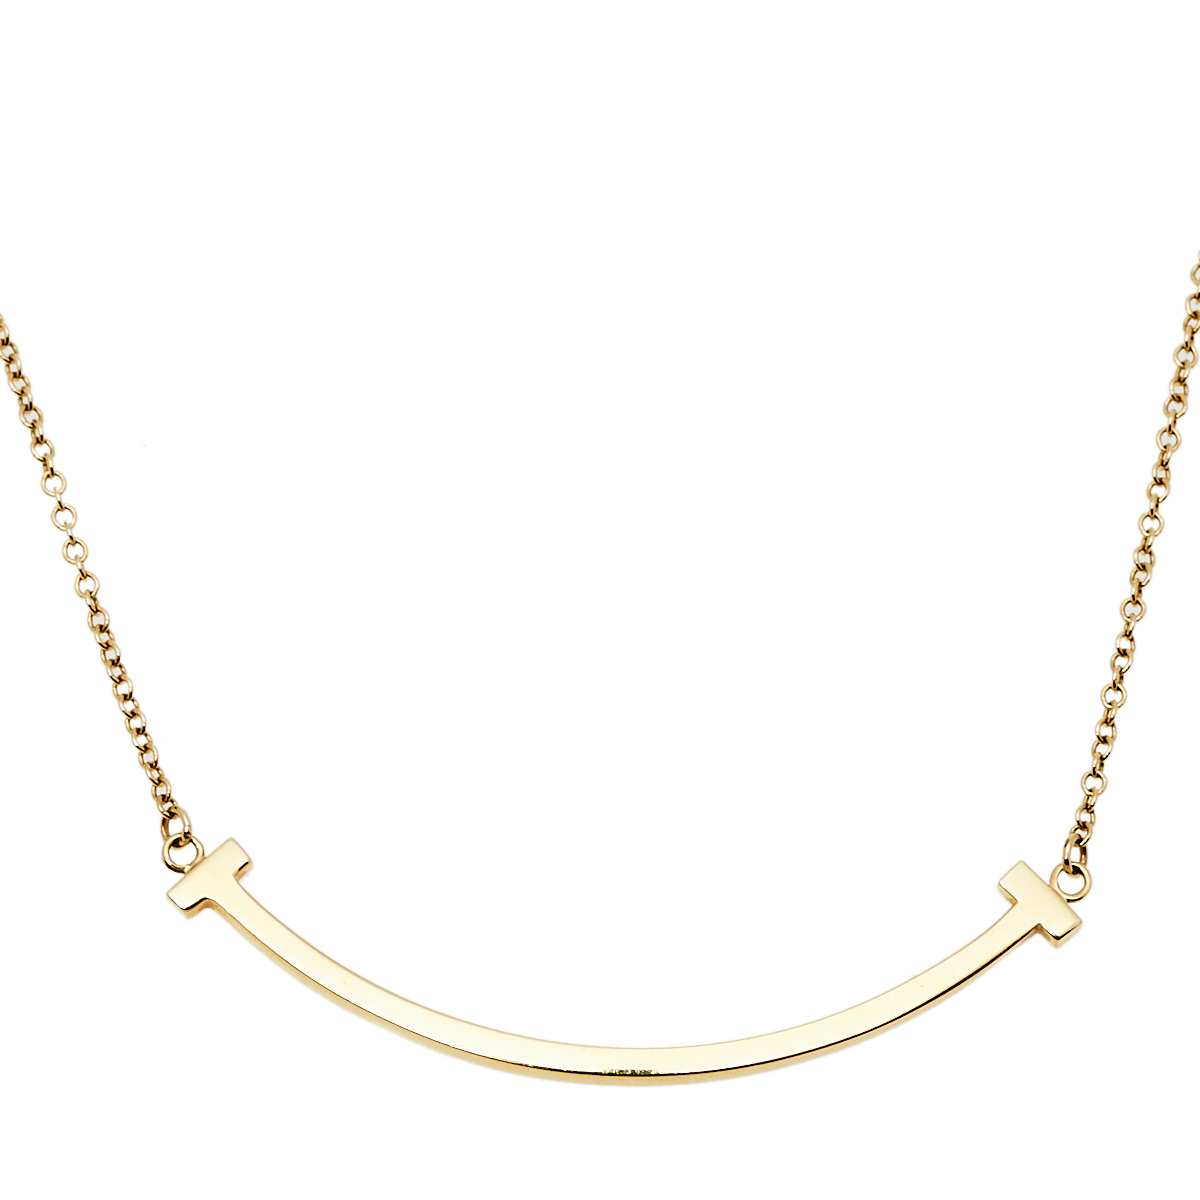 Tiffany & Co. T Smile 18K Yellow Gold Pendant Necklace